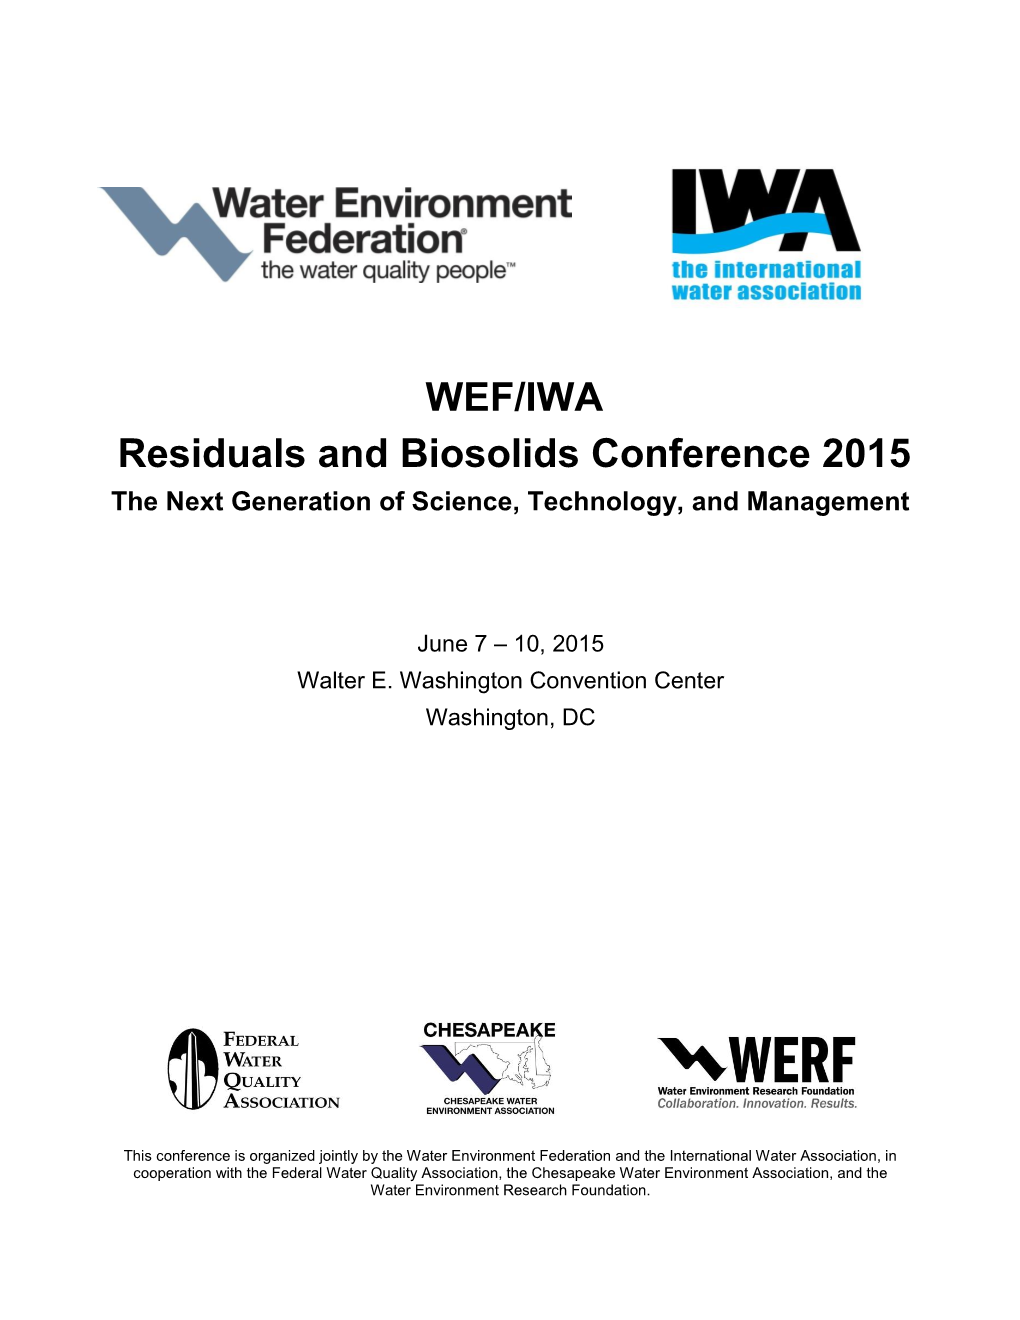 WEF/IWA Residuals and Biosolids Conference 2015 the Next Generation of Science, Technology, and Management